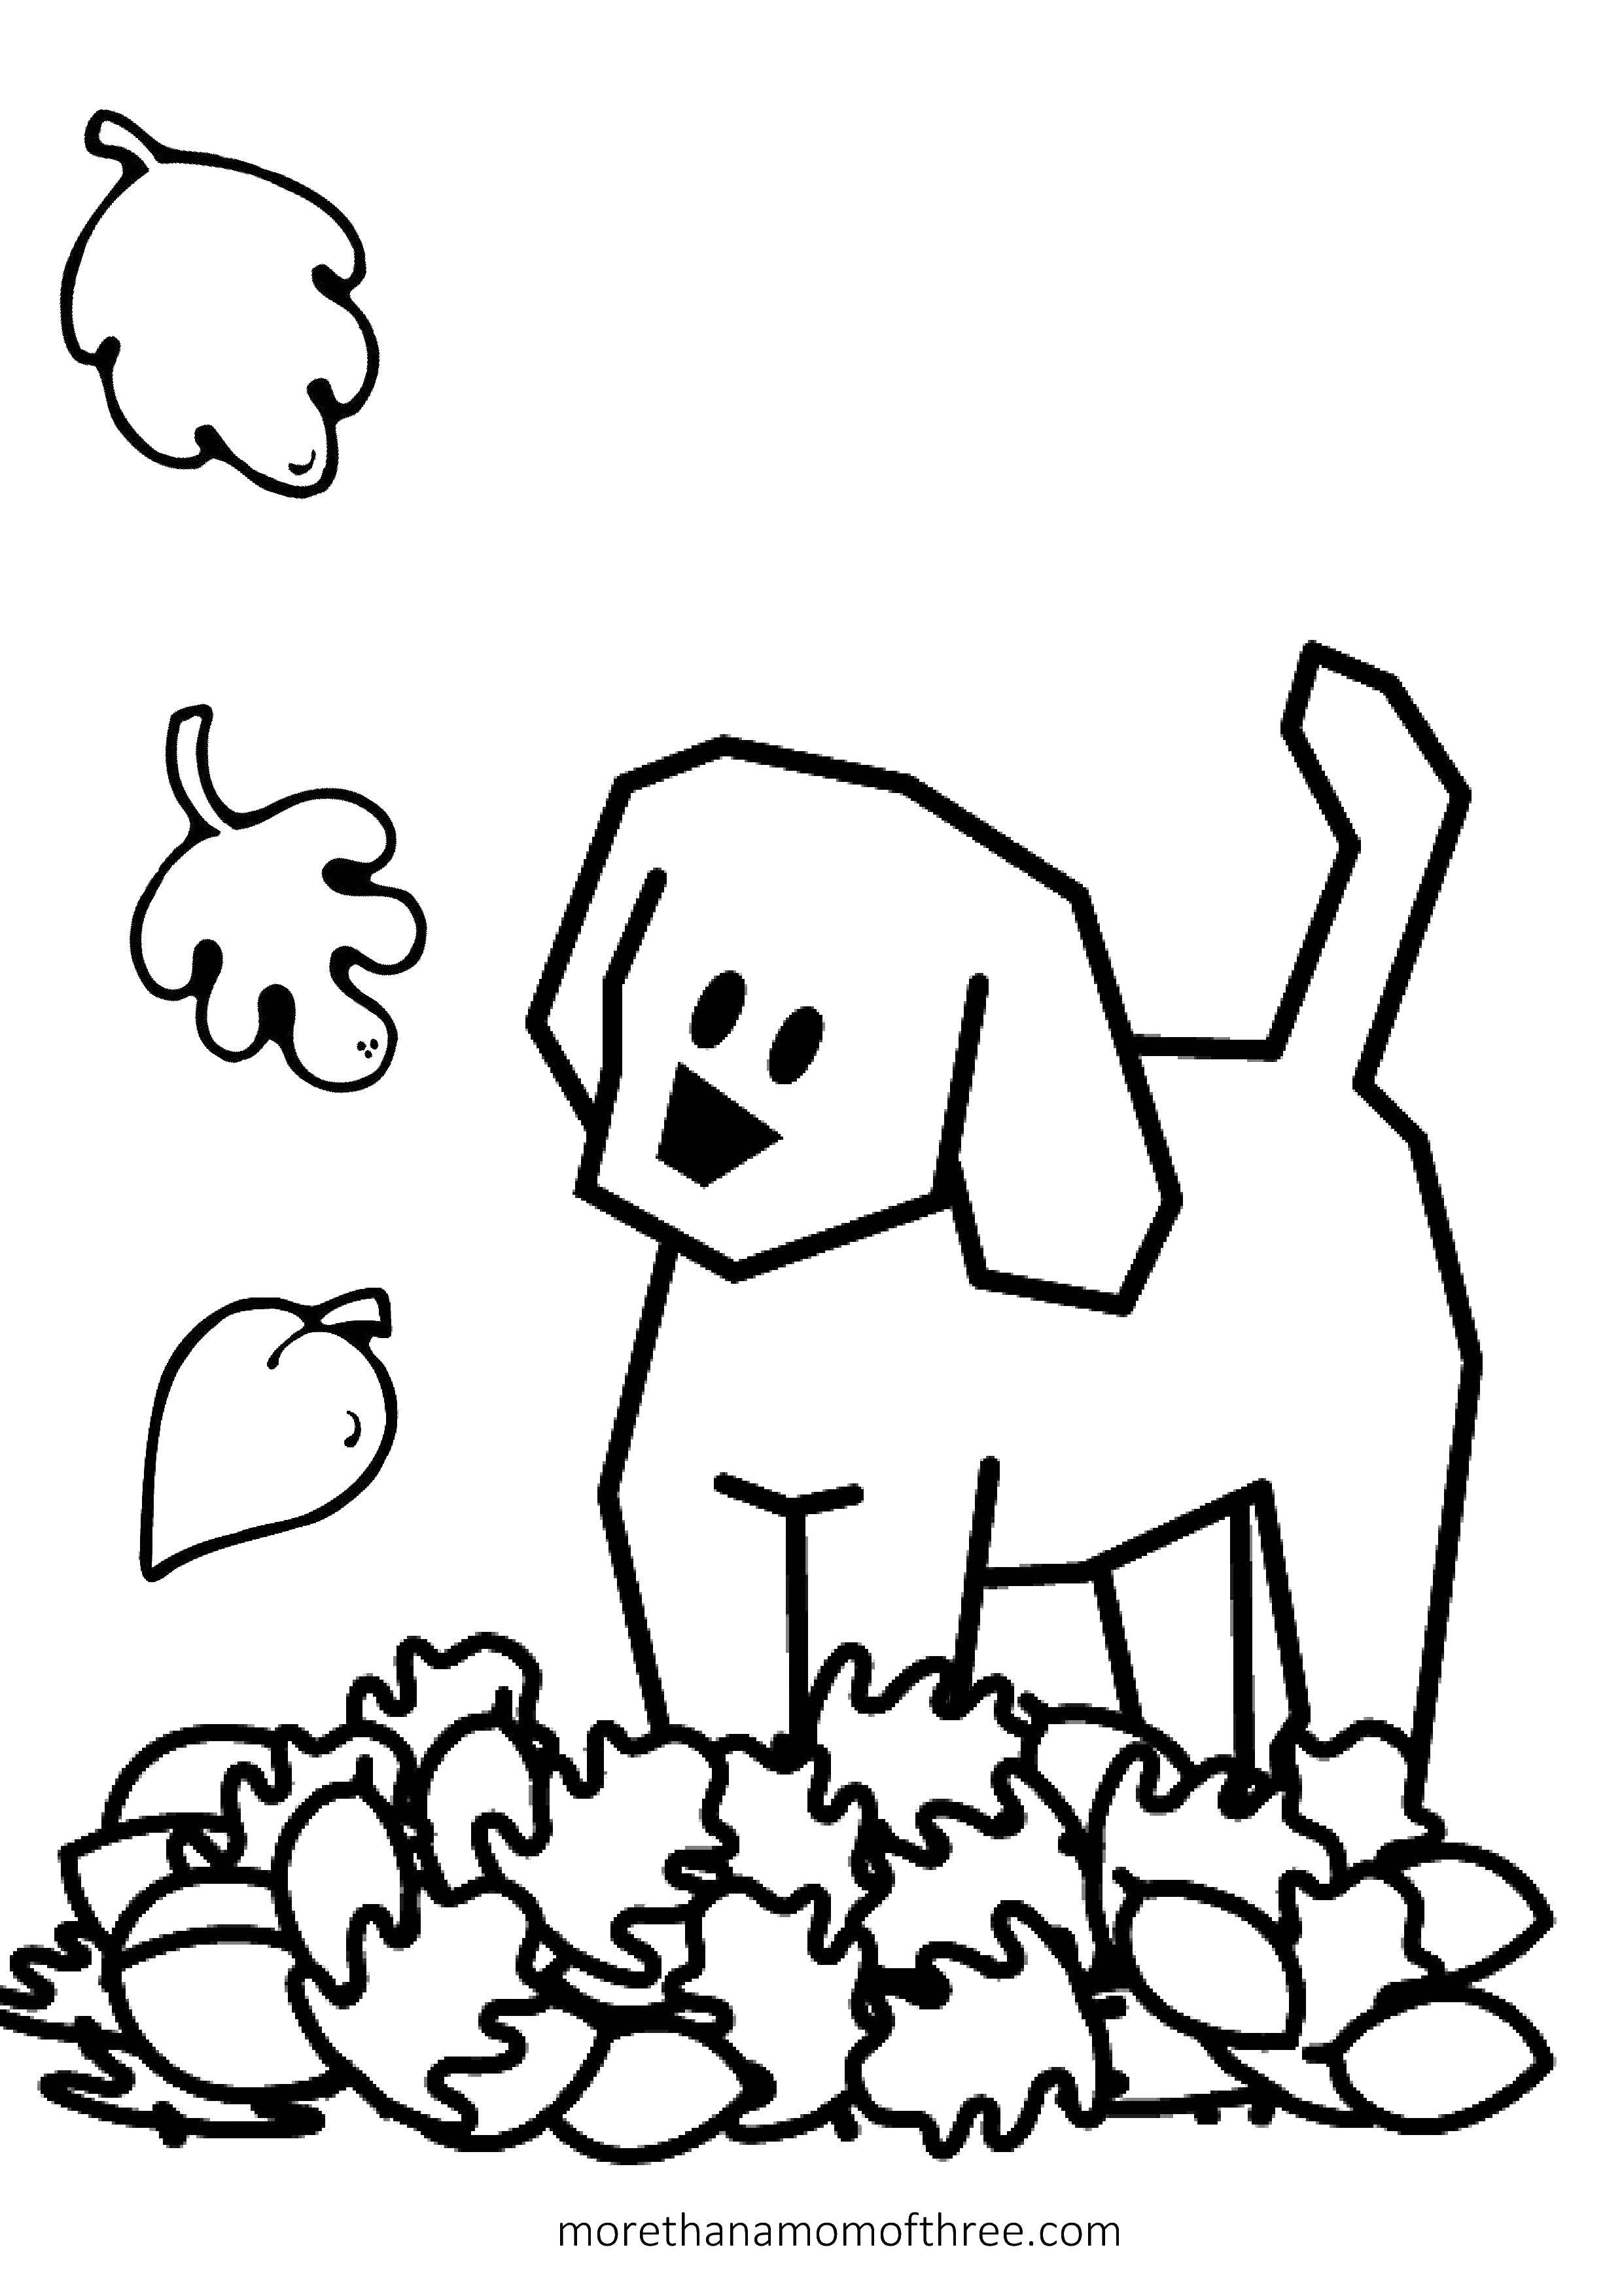 Coloring The dog in the fall leaves. Category Autumn. Tags:  Autumn, leaves.